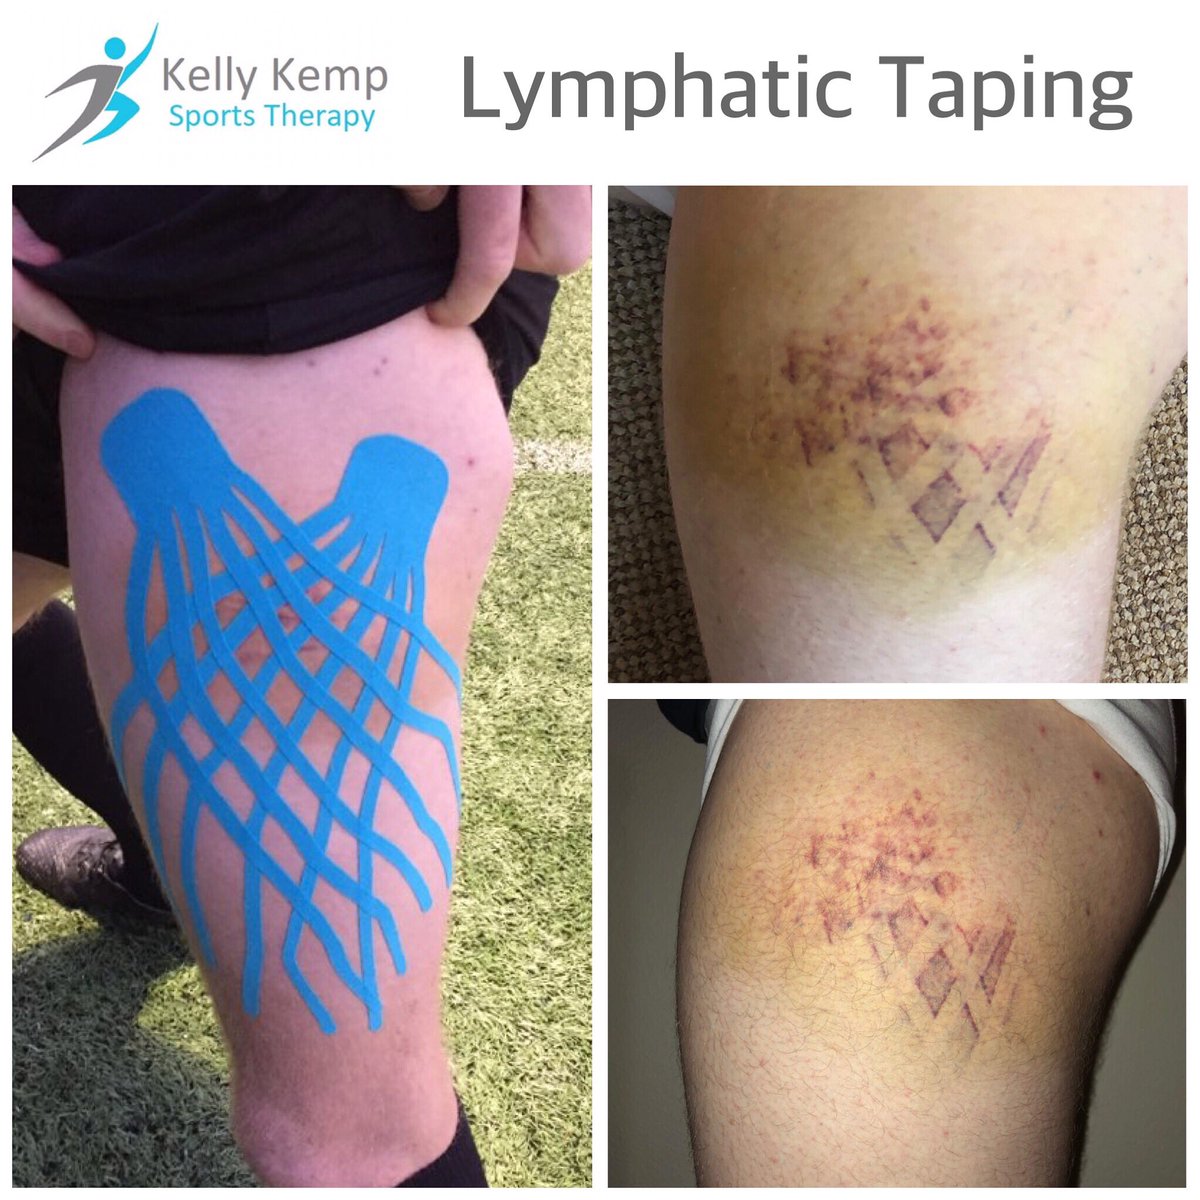 A footballer fell onto his hip & developed this large bruise. These were the results after I applied a lymphatic k-tape method! Regardless of inconclusive research, this shows k-tape can have physiological effects!
#kinesiologytape #ktape #injury #lymphatic #sportstape #kttape